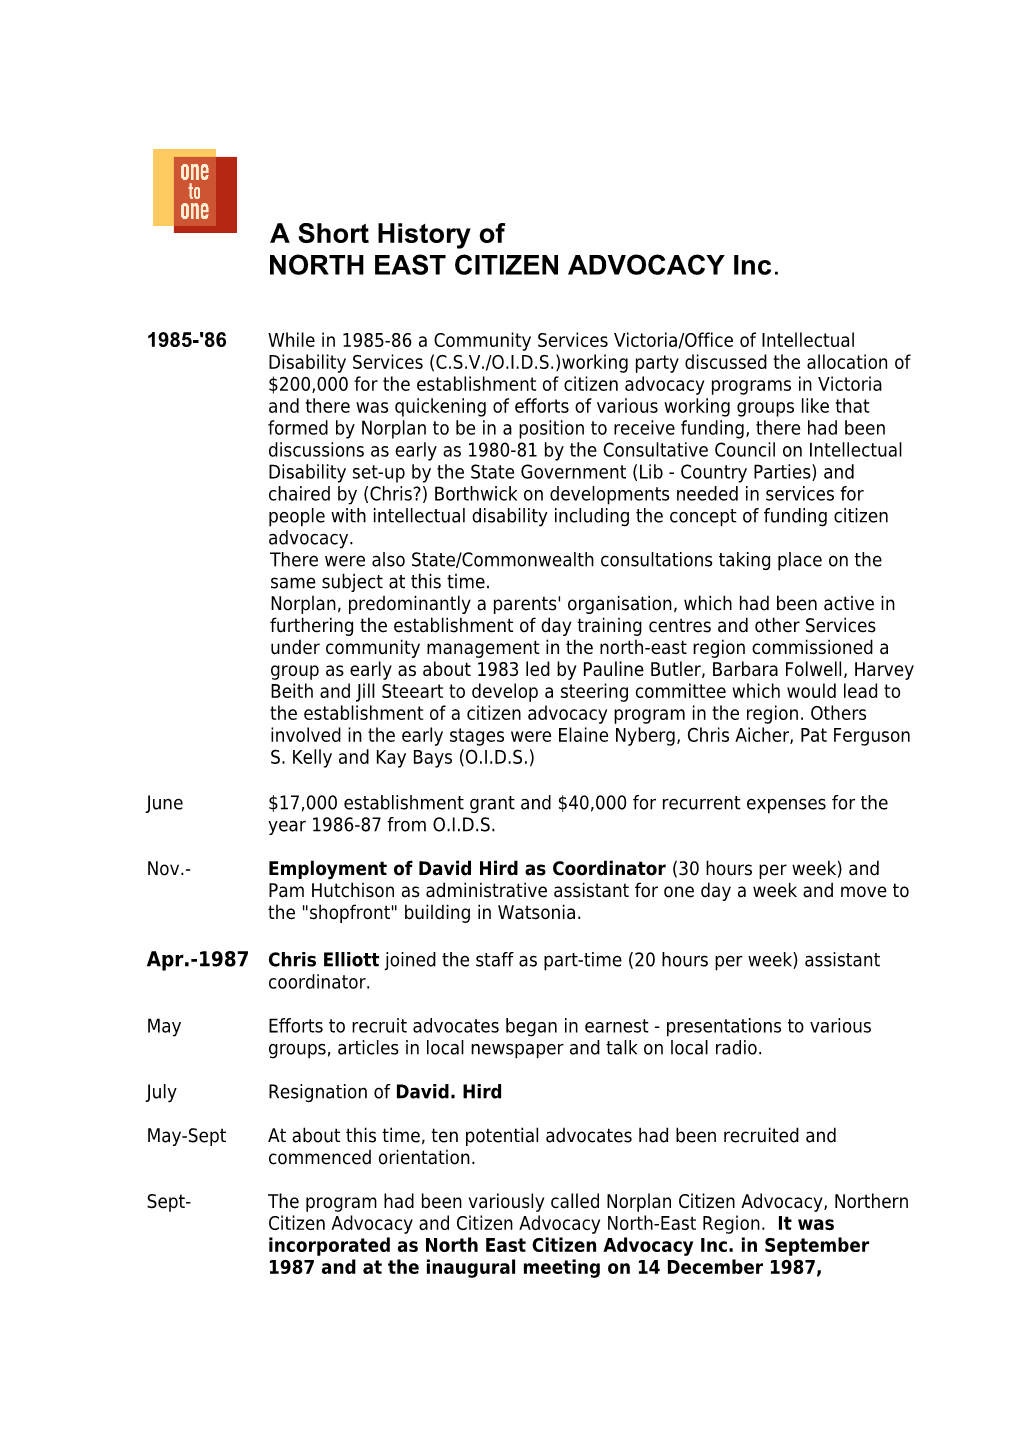 History: North East Citizen Advocacy Inc. 1987-2012